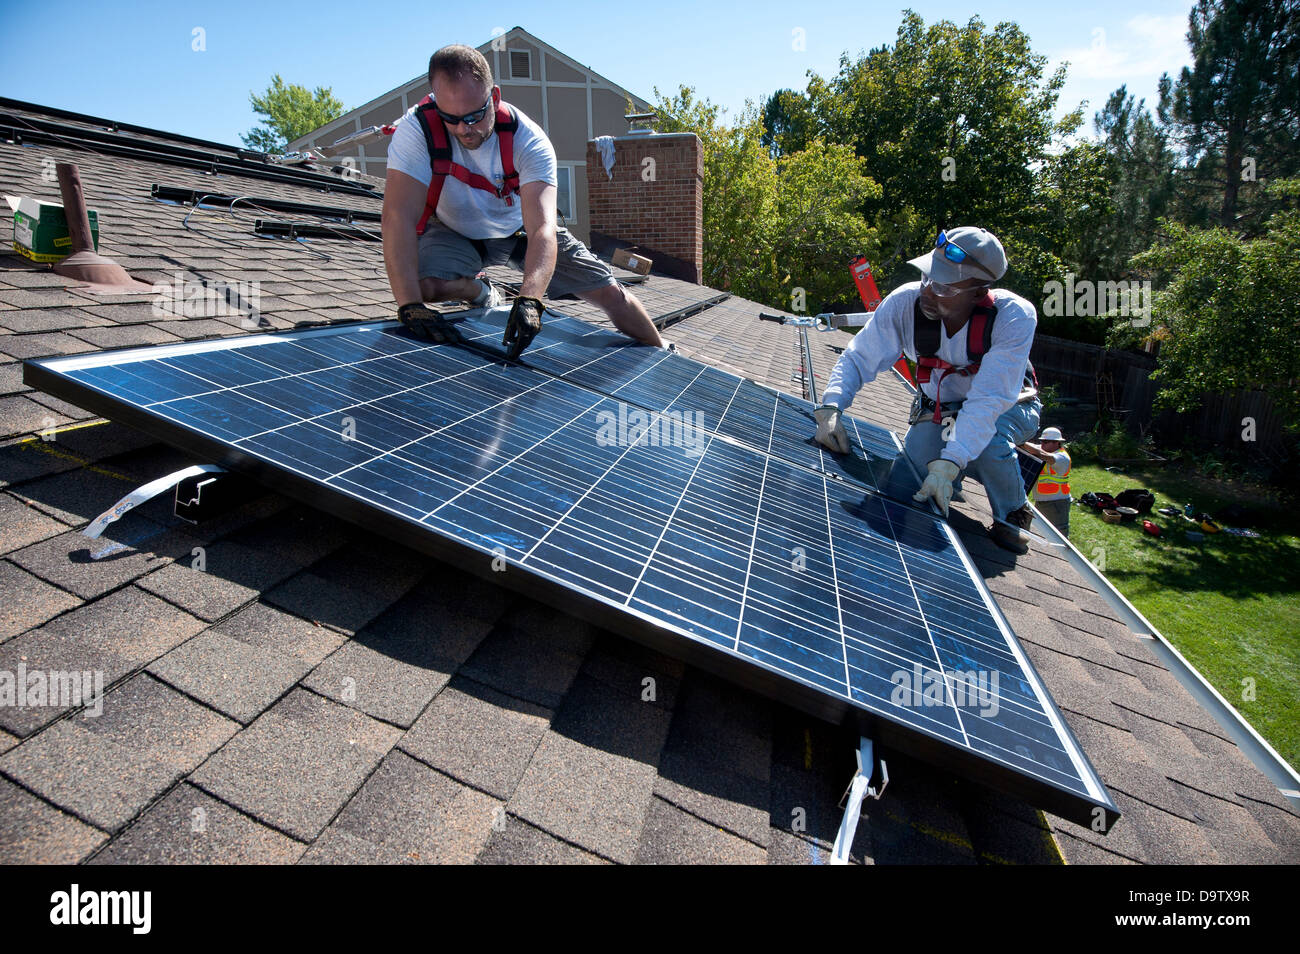 Construction workers install a Photovoltaic Solar Electric System on the roof of a home September 10, 2012 in Englewood, Colorado. Stock Photo